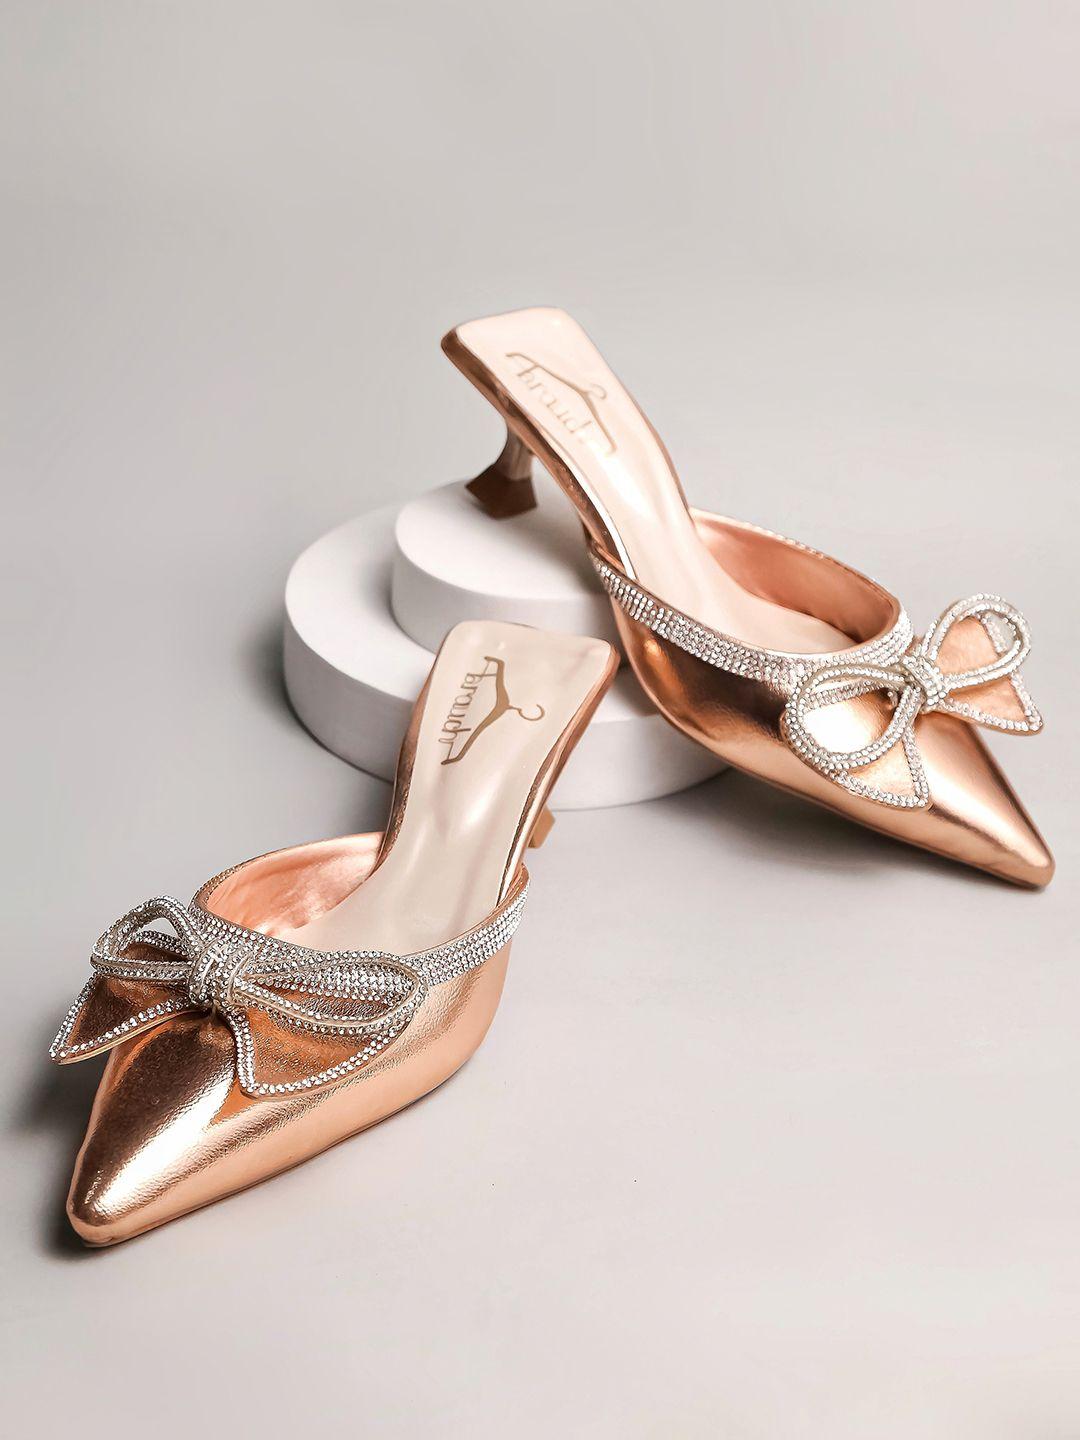 brauch pointed toe embellished kitten mules with bows